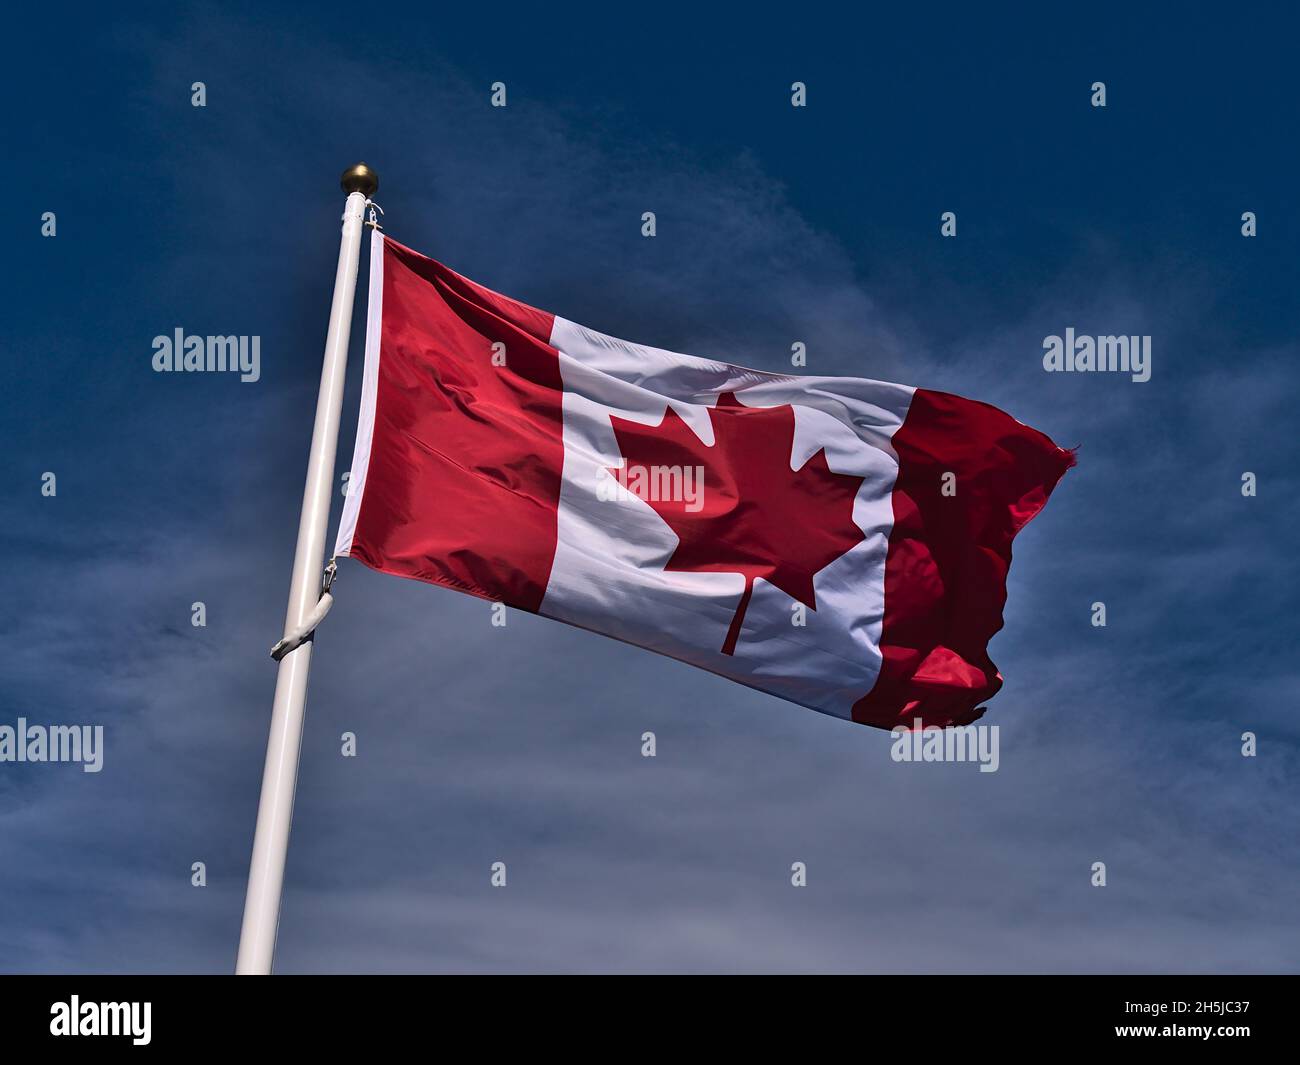 Low angle view of flying Canadian national flag with white and red colors and maple leaf in center on flagpole in front of blue sky with clouds. Stock Photo